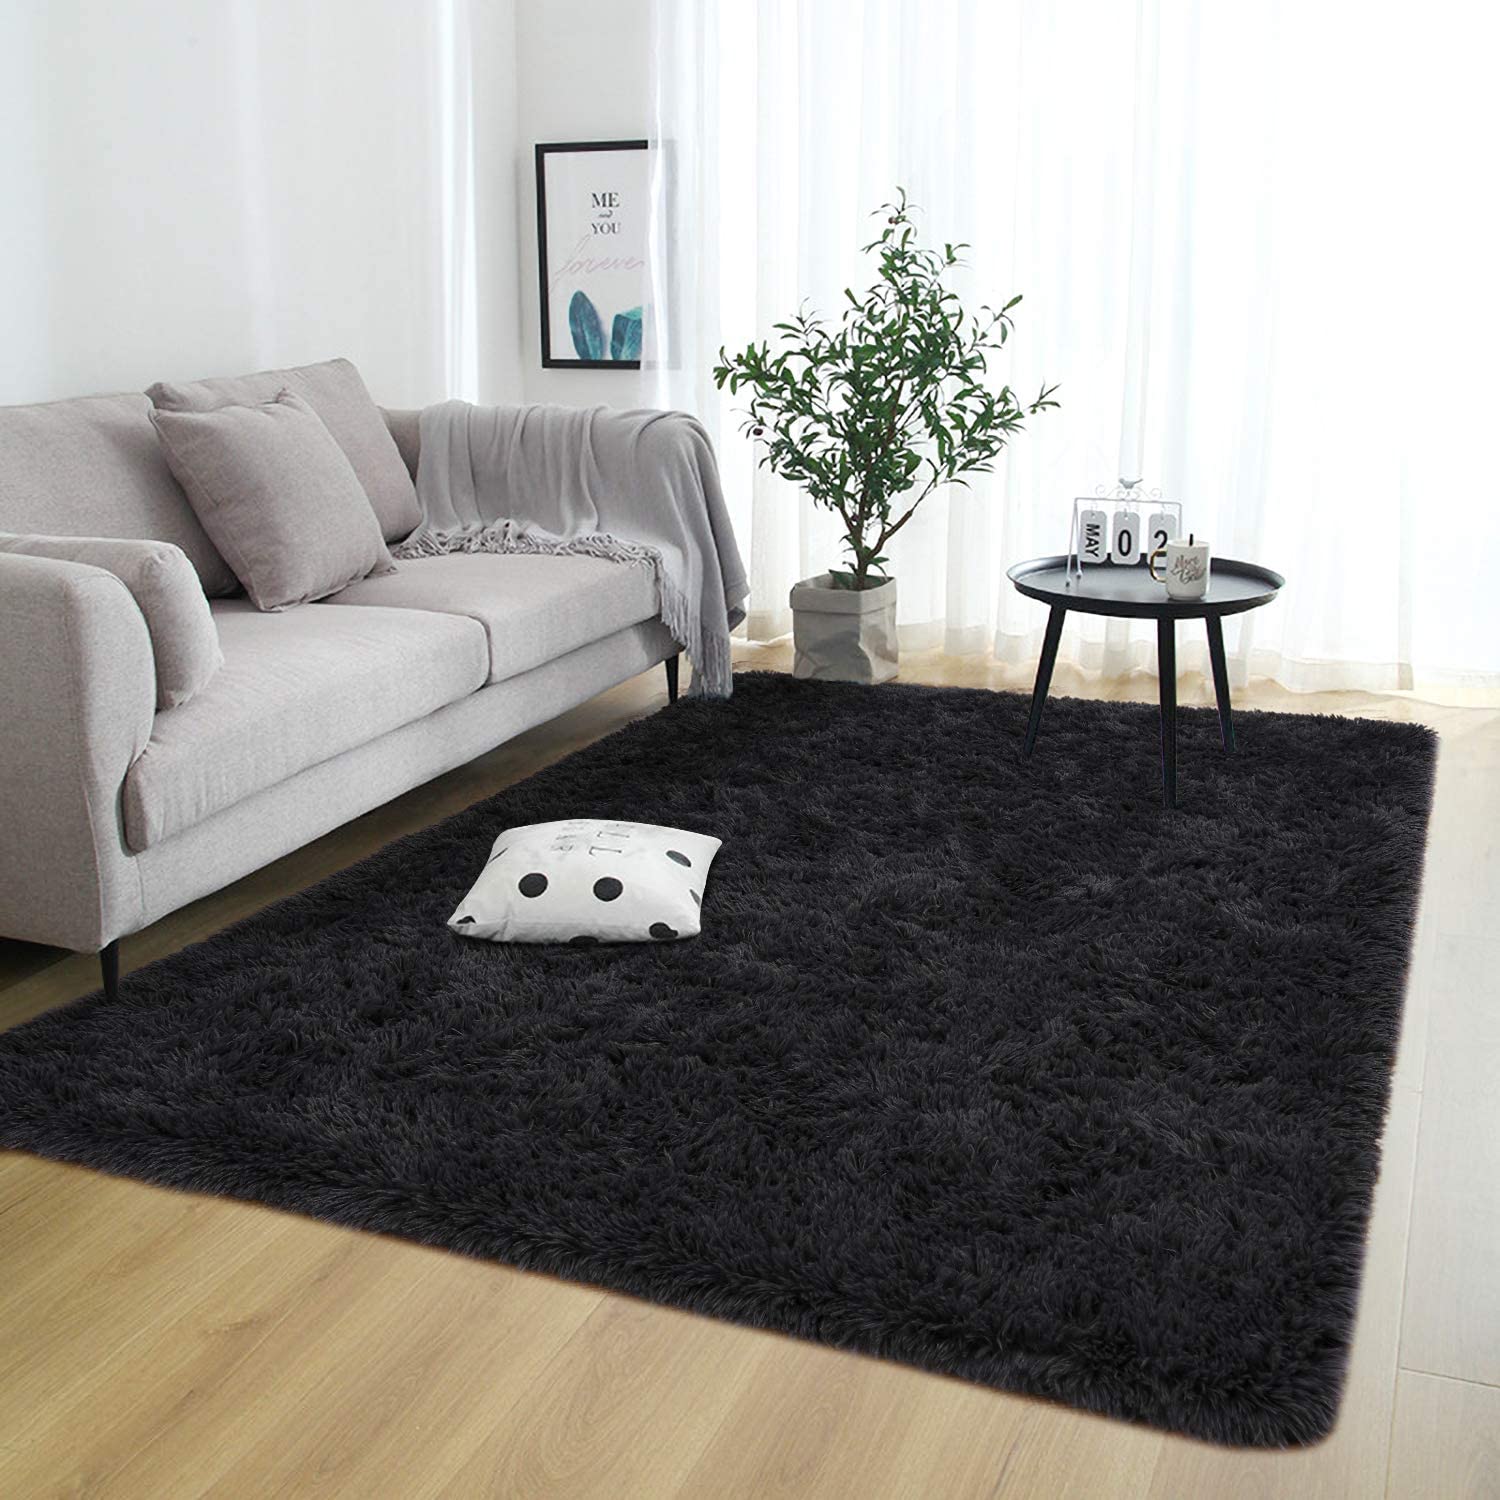 Details about   Rostyle Super Soft Fluffy Area Rugs for Bedroom Living Room Shaggy Floor Carpets 